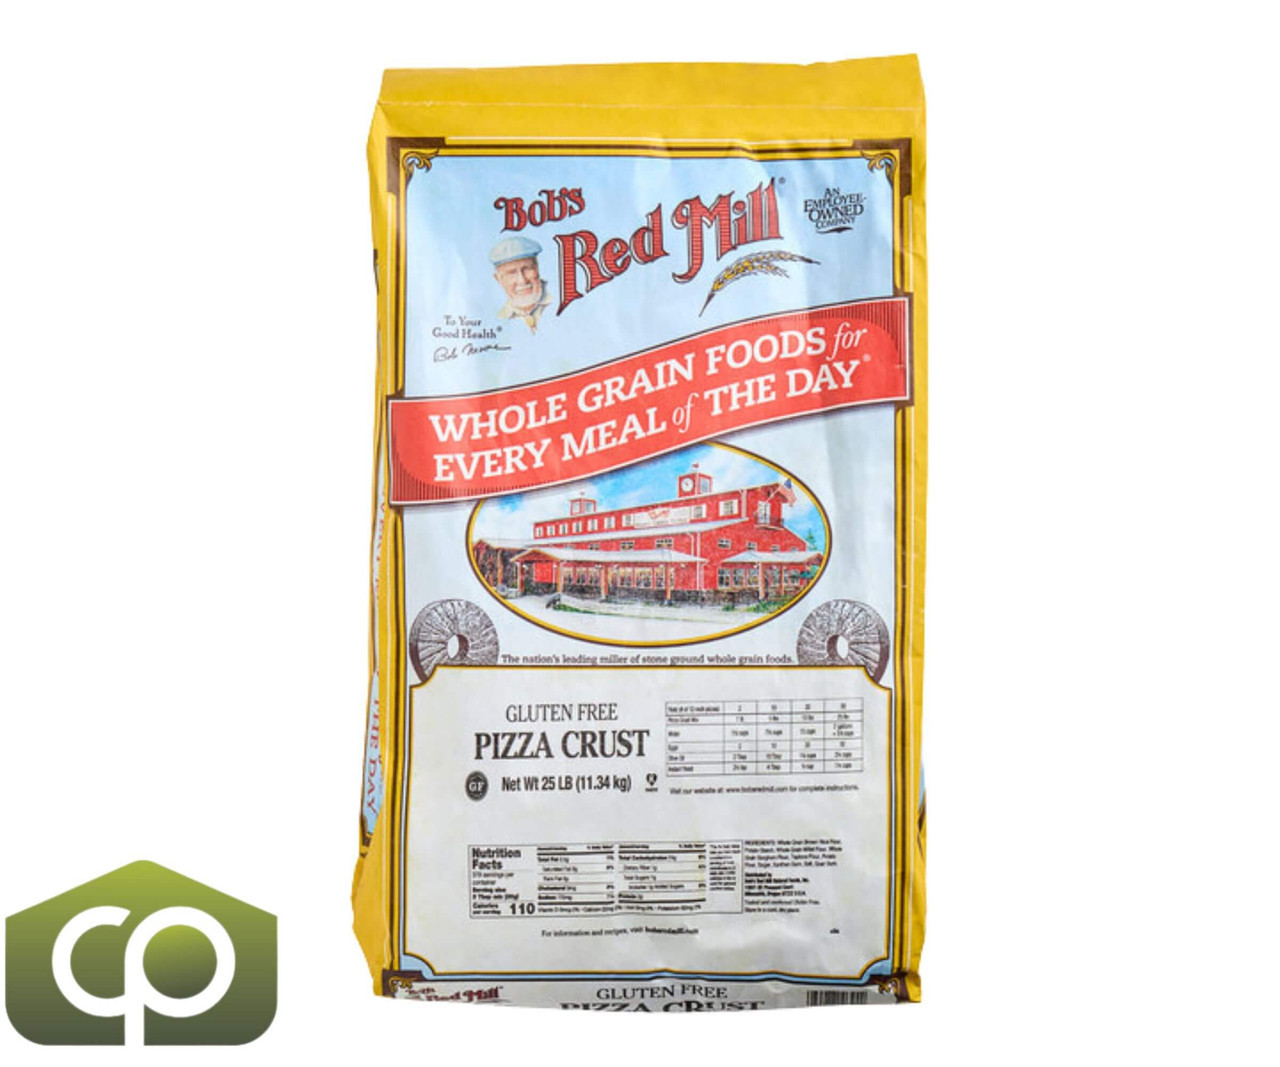 Bob's Red Mill 25 lbs. (11.34 kg) Gluten-Free Pizza Crust Mix (60 BAGS/PALLET) - Chicken Pieces